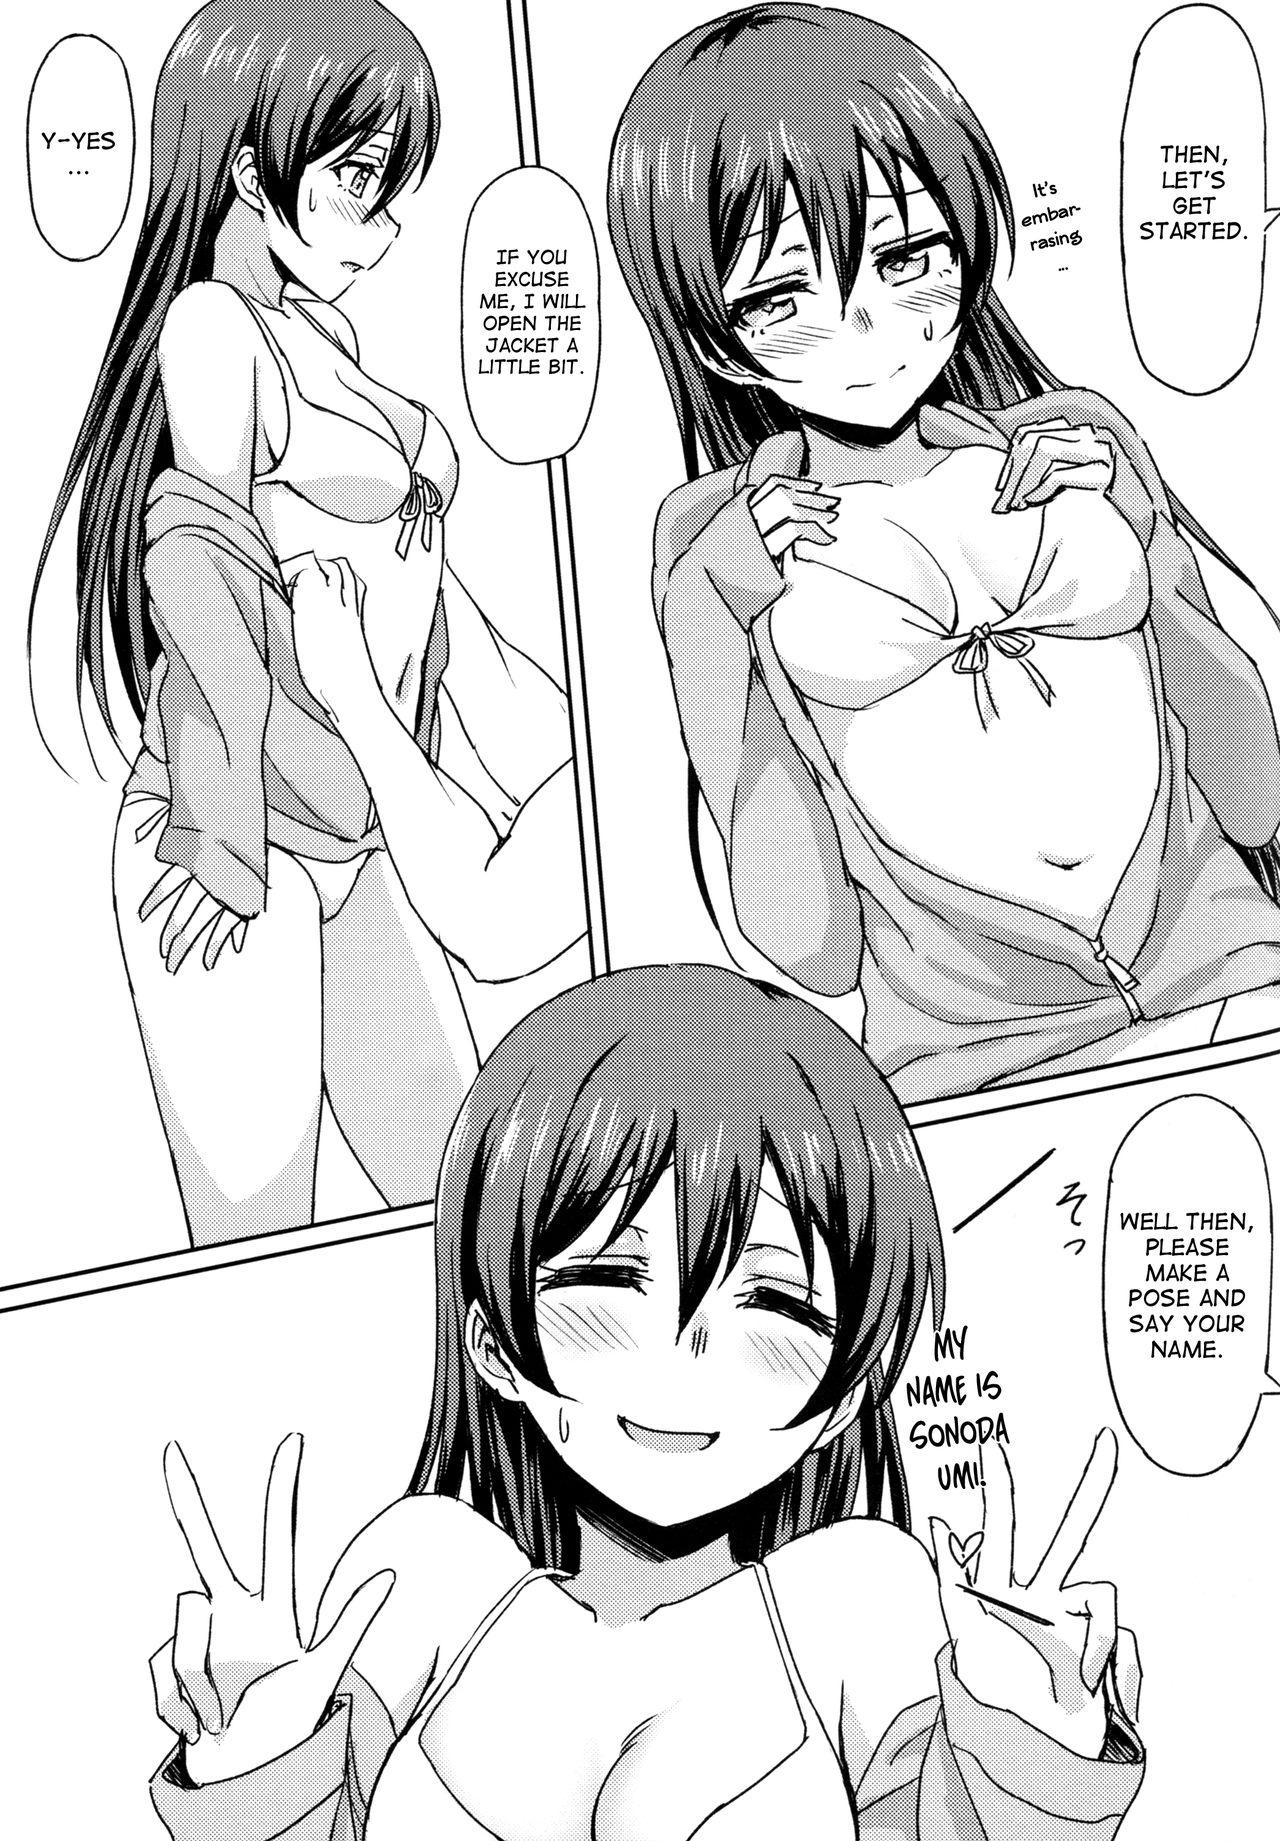 Hymen Hah,Wrench This! - Love live Camera - Page 7